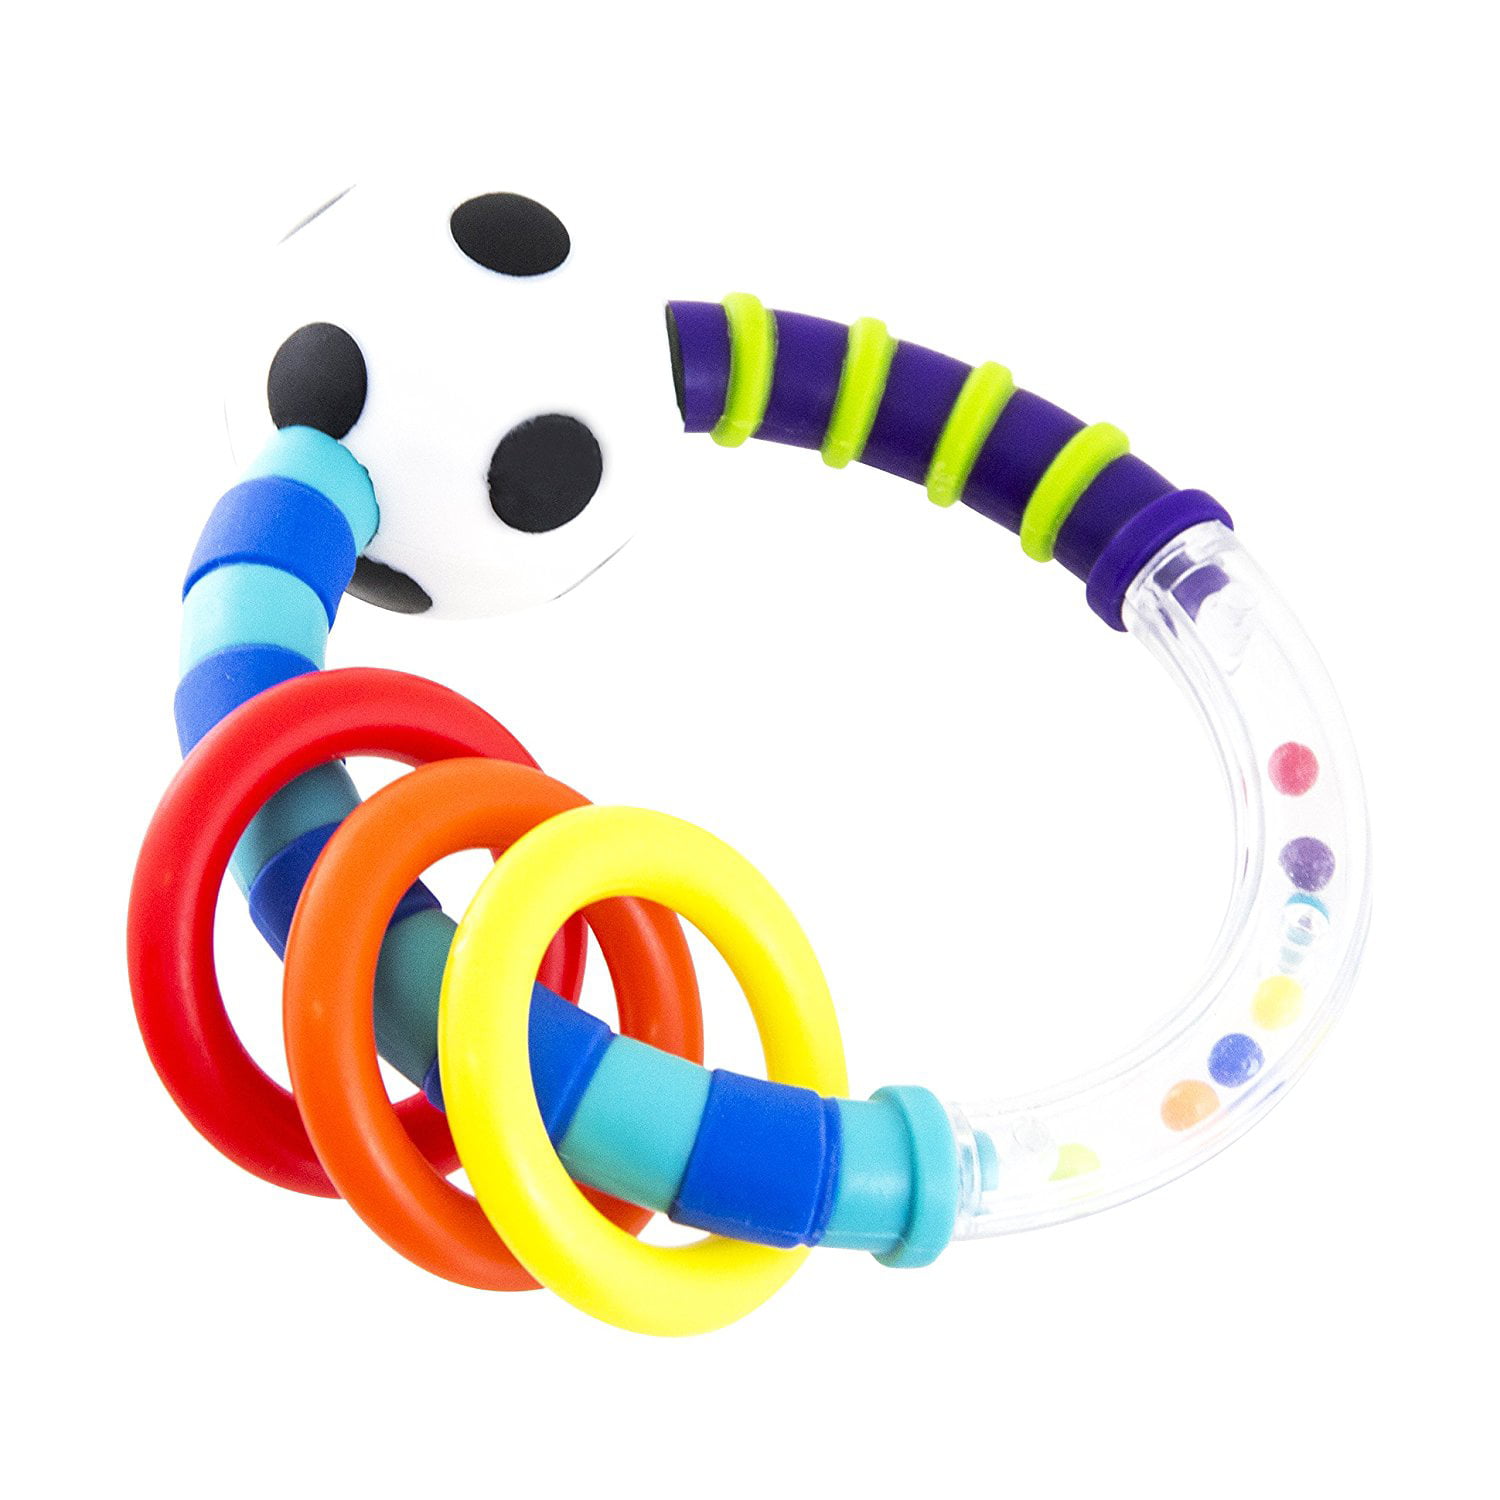 Sassy Ring Rattle Developmental Baby Toy for Early Learning For Ages Newborn and Up 80017 High Contrast